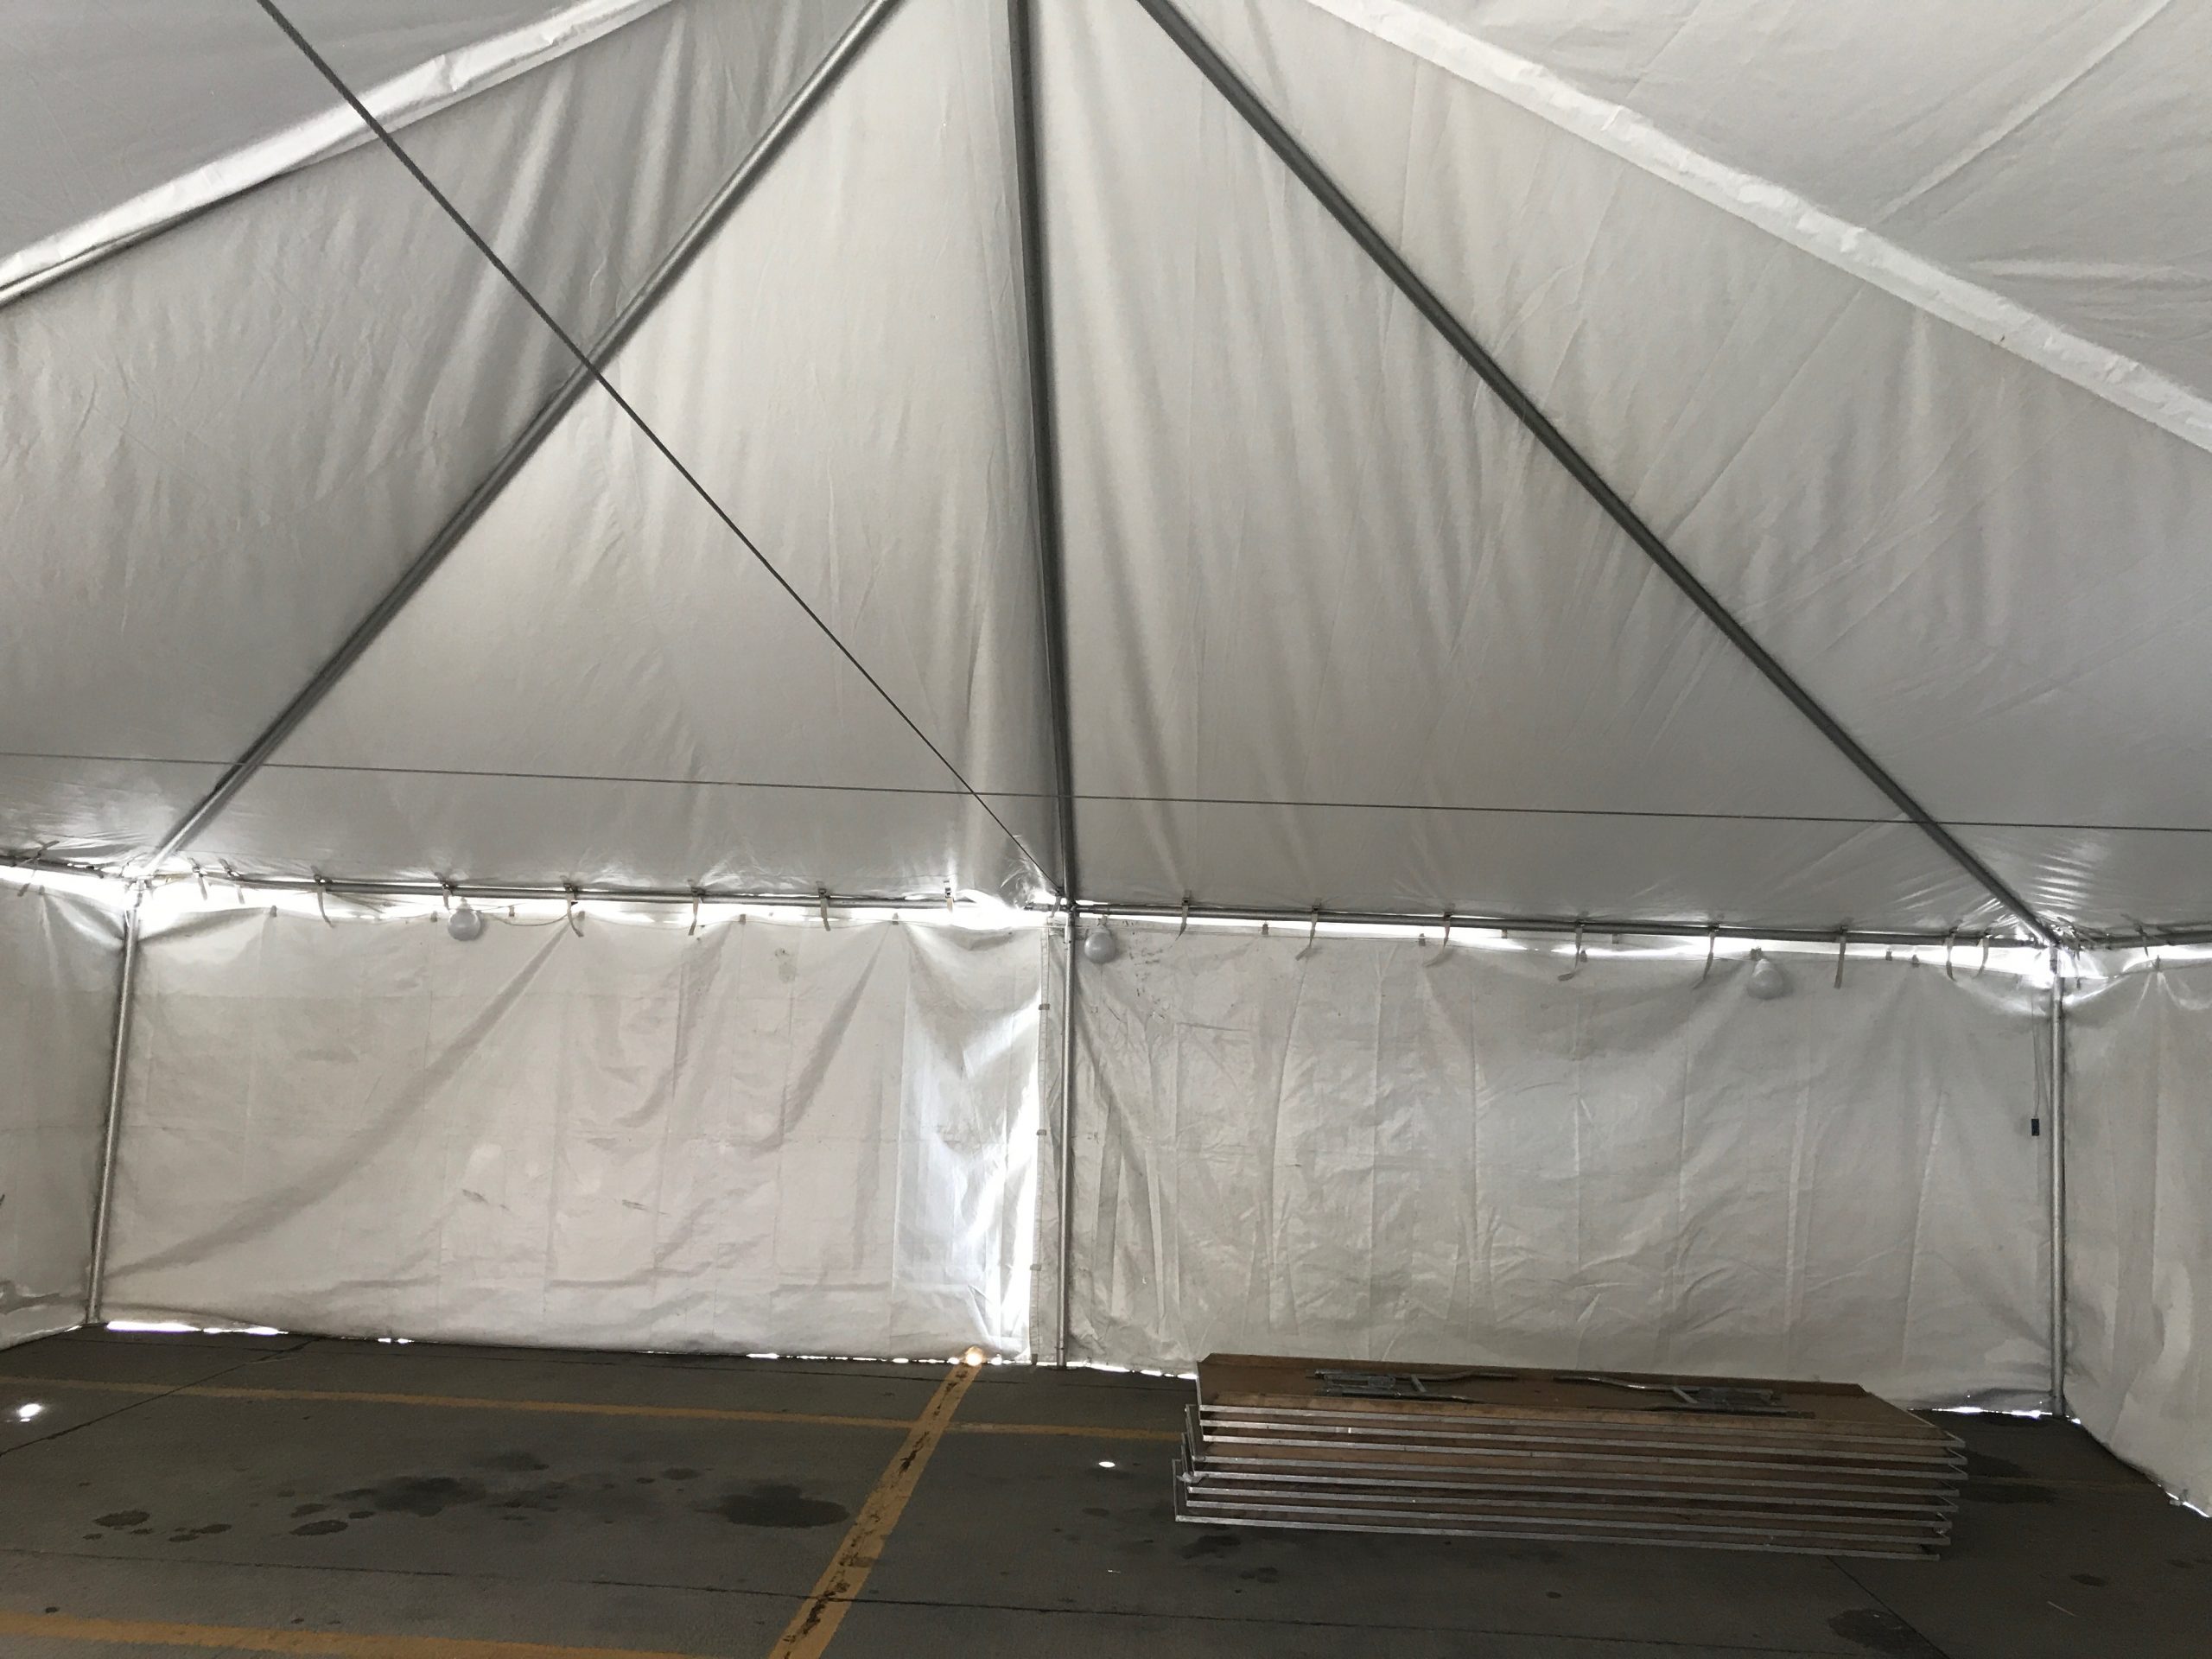 Harbor Freight Tent Sale | Rent 30' x 30' Frame Tent | Sioux City, IA harbor freight trailer